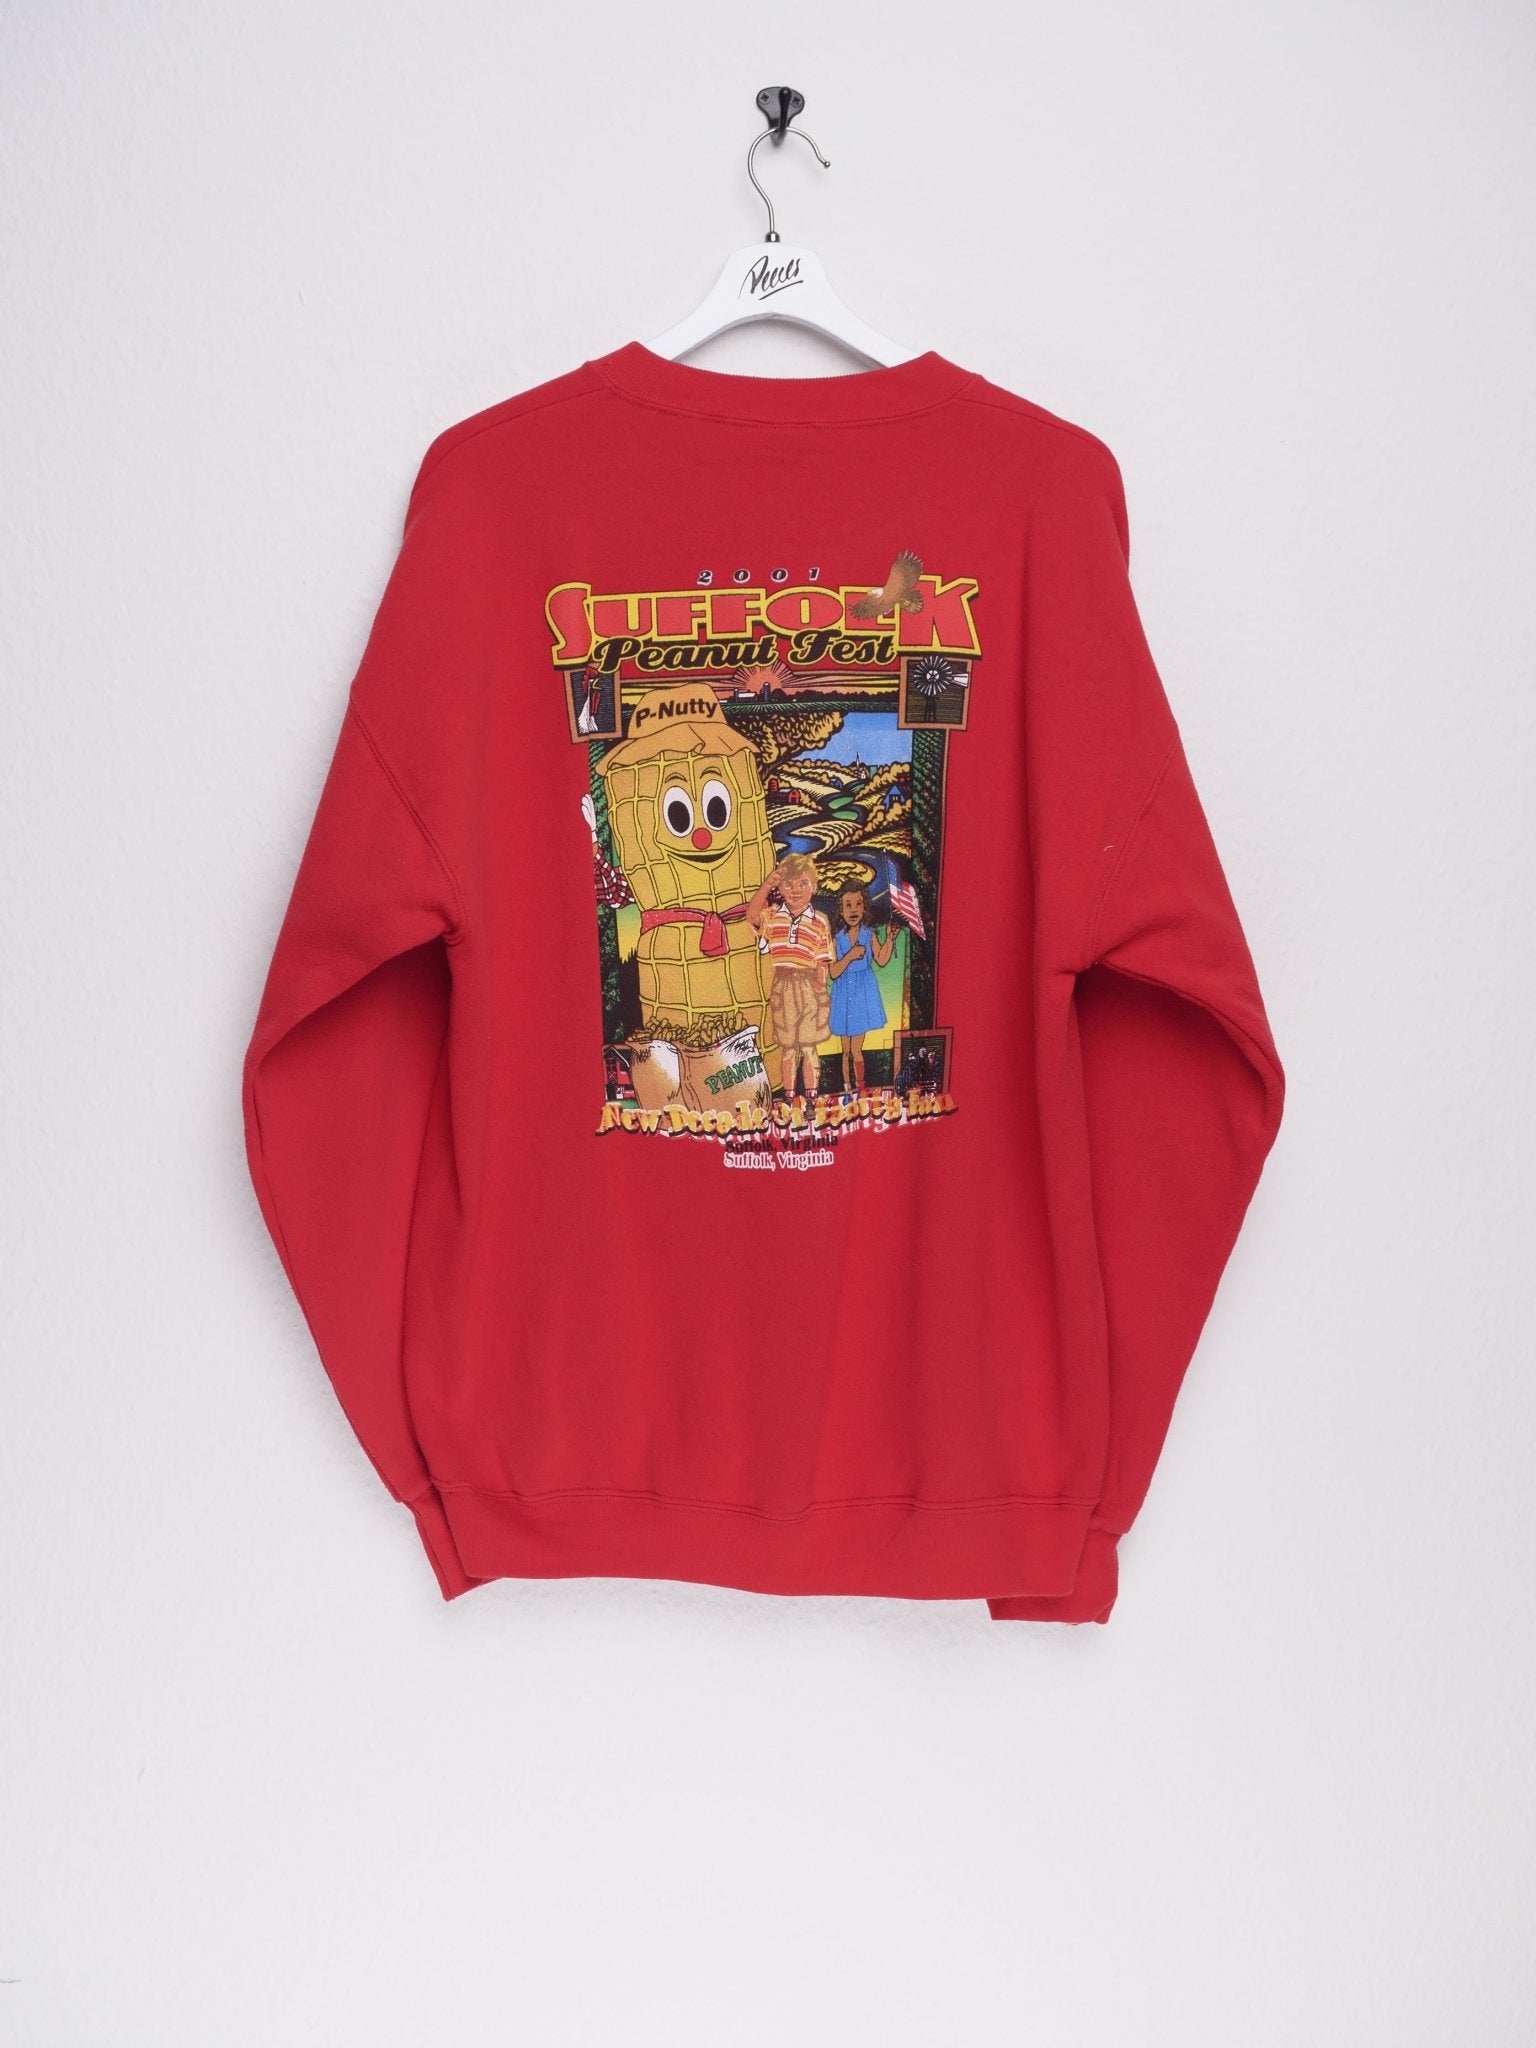 Suffolk Peanut Fest printed Graphic red Sweater - Peeces